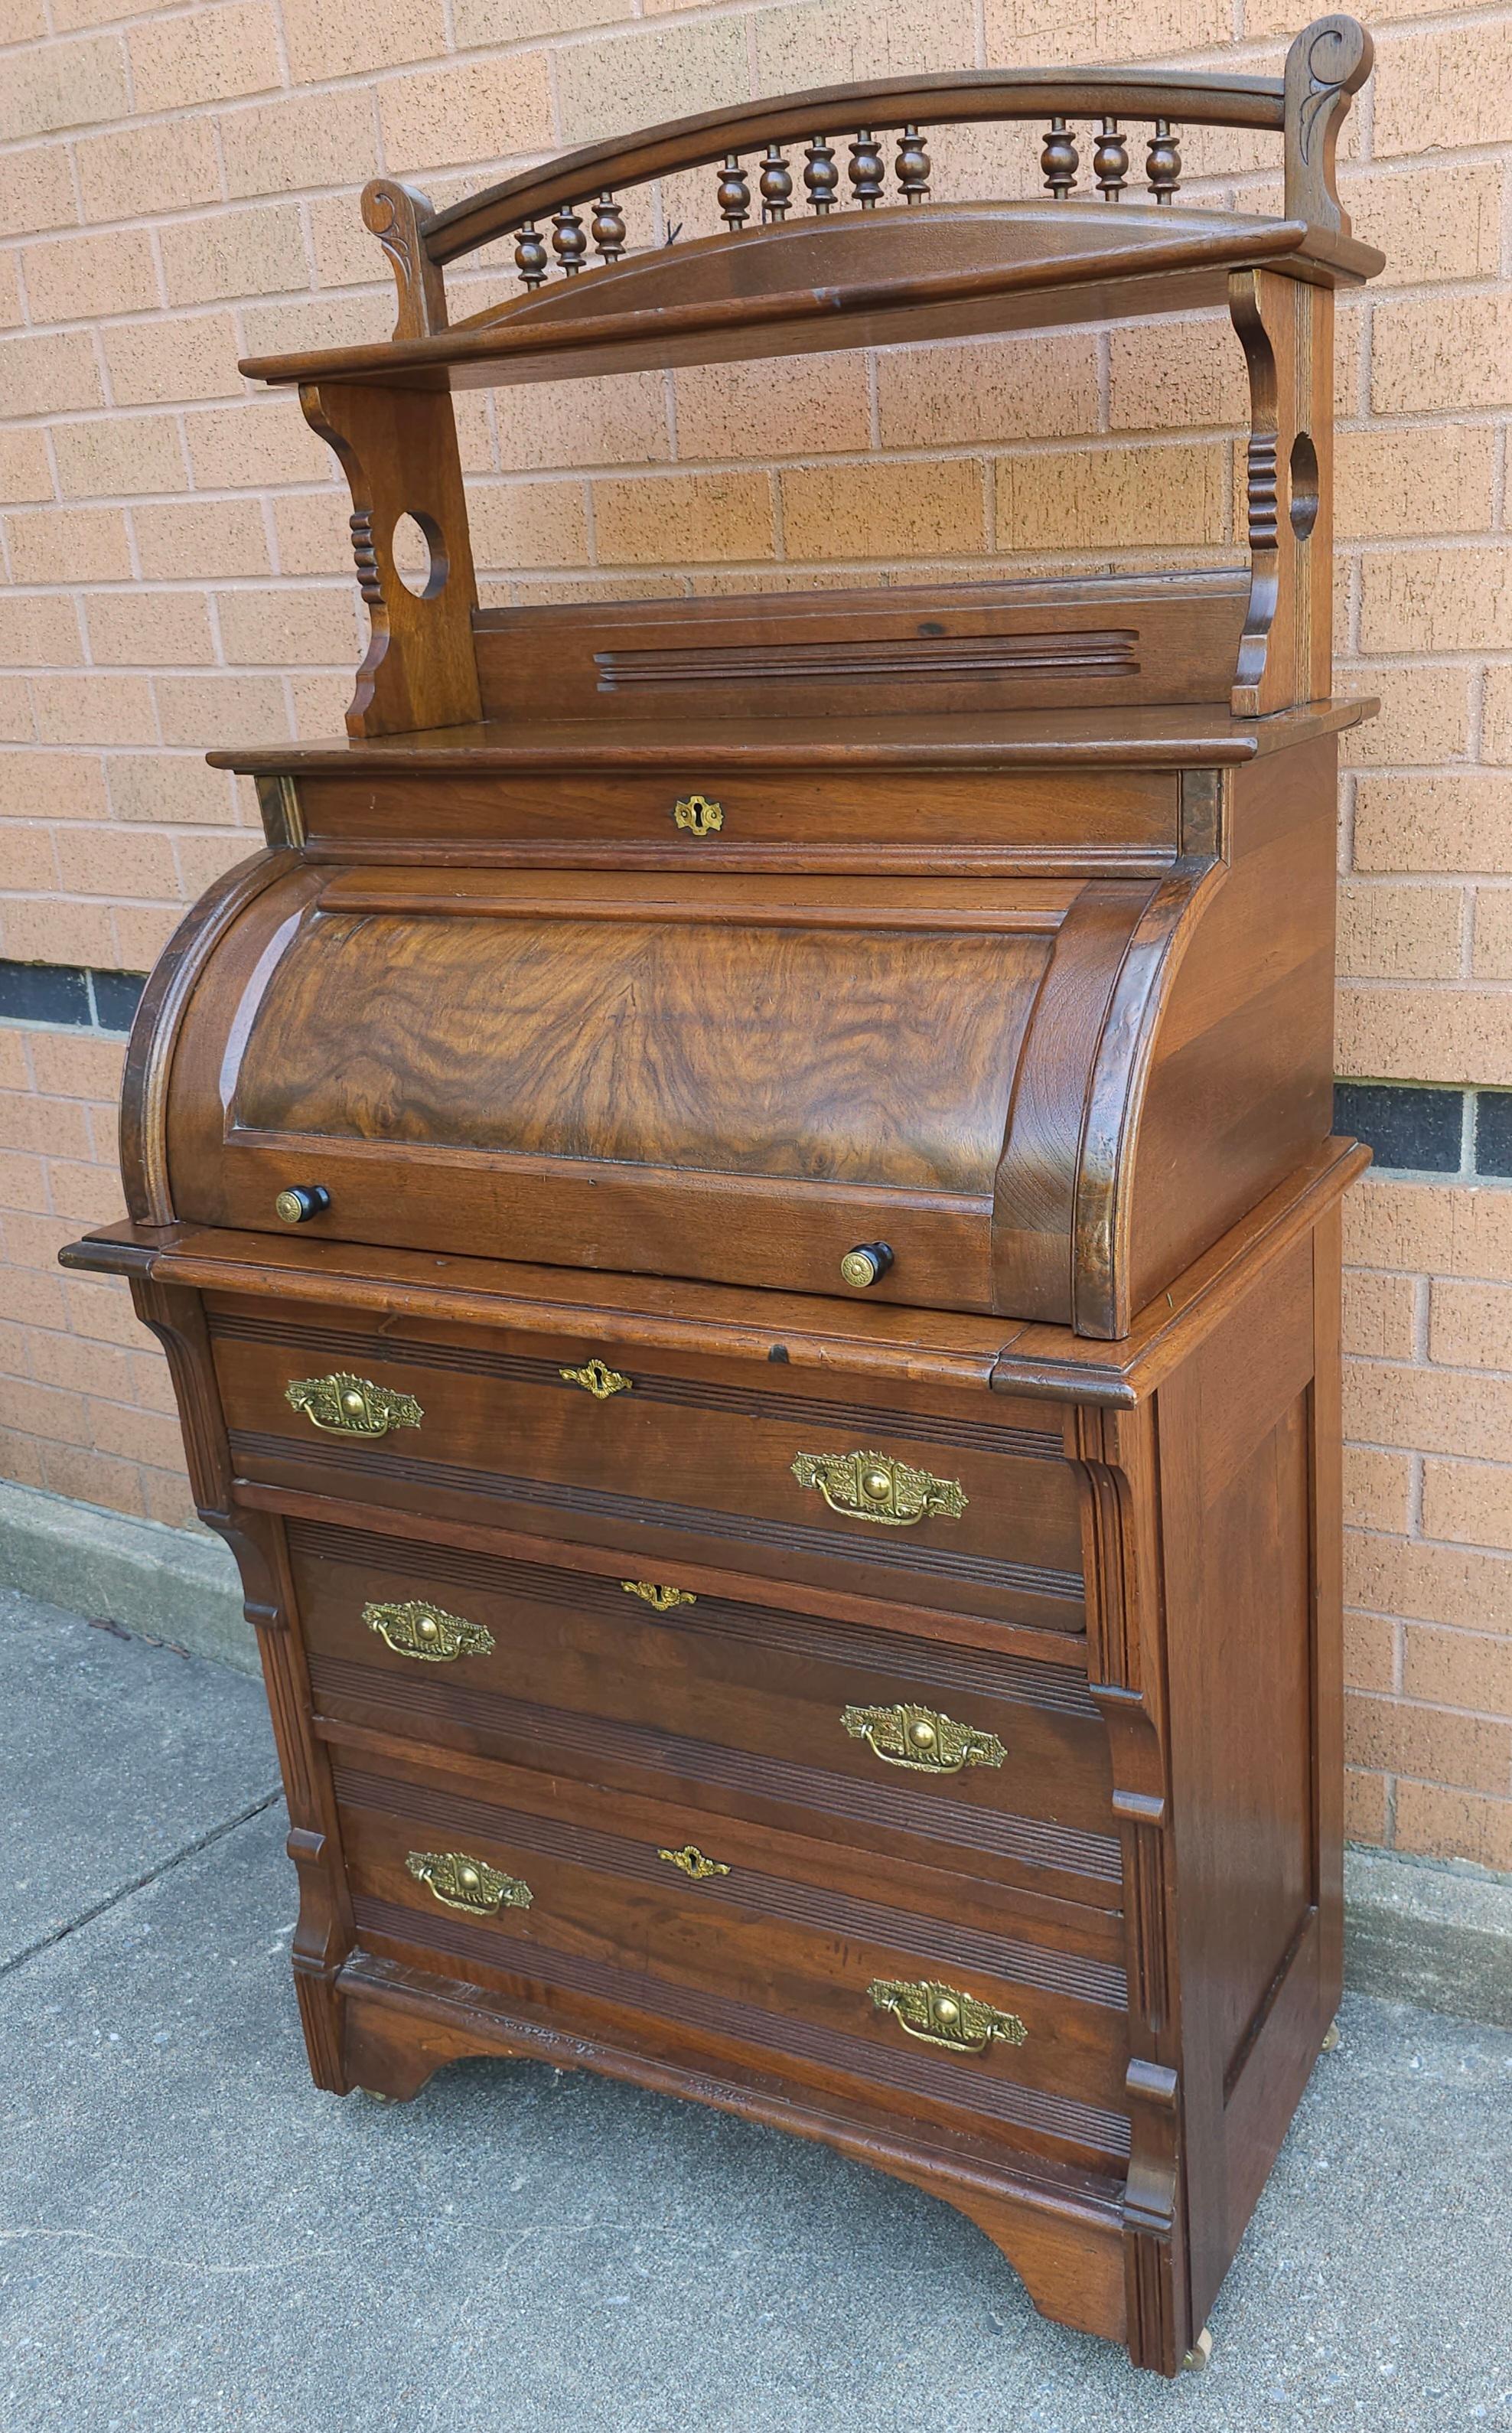 A Late 19th Century Four-Part Handcrafted Victorian Walnut Cylinder Front Rolling Desk with felt lined pull out tray. On original wooden wheels. Easily breaks down in parts to facilitate handling. Light weigh. Measures 32